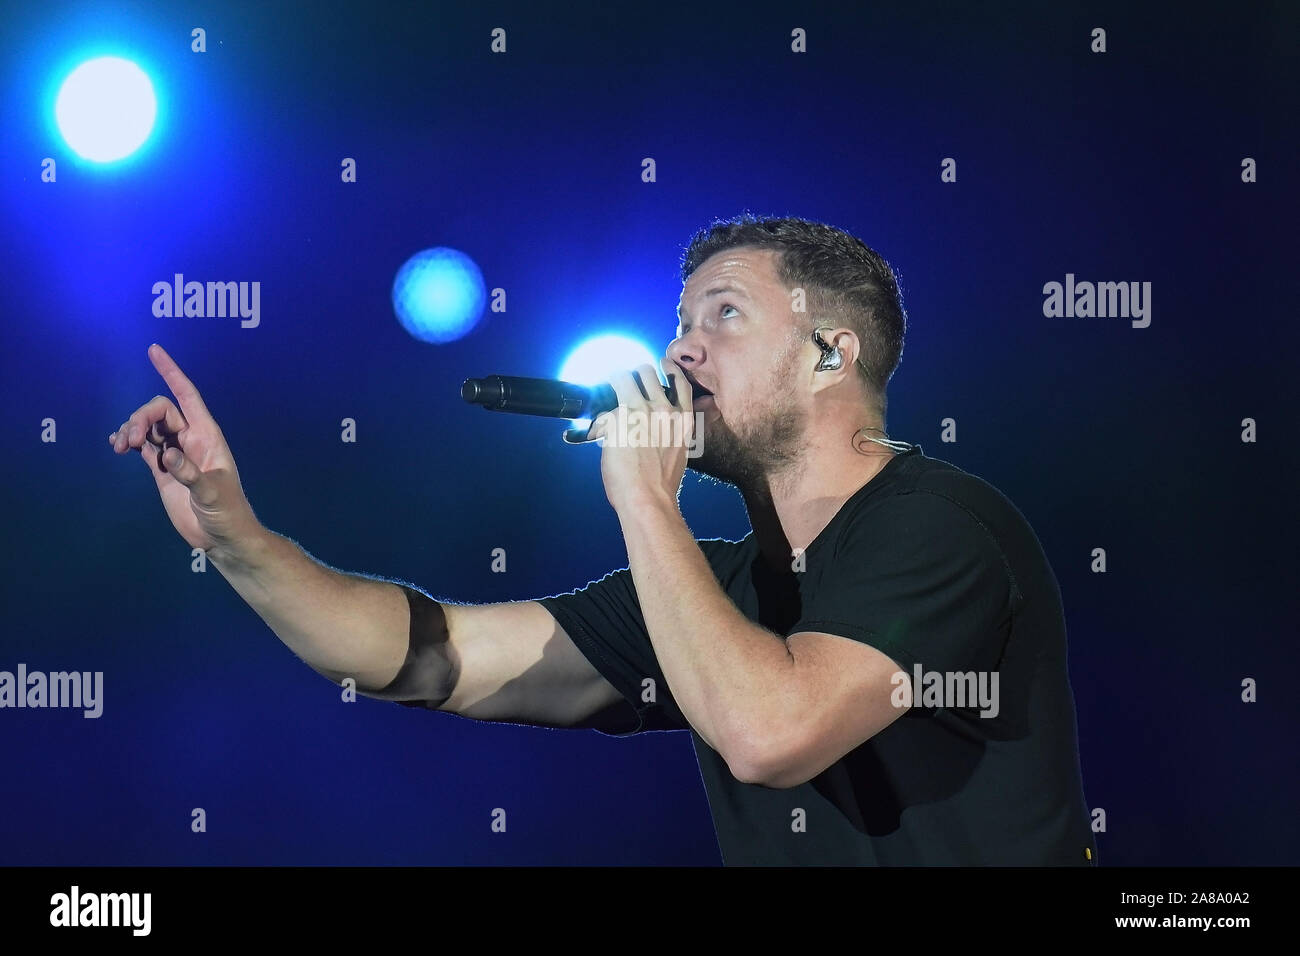 Rio de Janeiro, Brazil, October 6, 2019. Lead singer Dan Reynolds of the indie rock band Imagine Dragons during a concert at Rock in Rio 2019 in Rio. Stock Photo